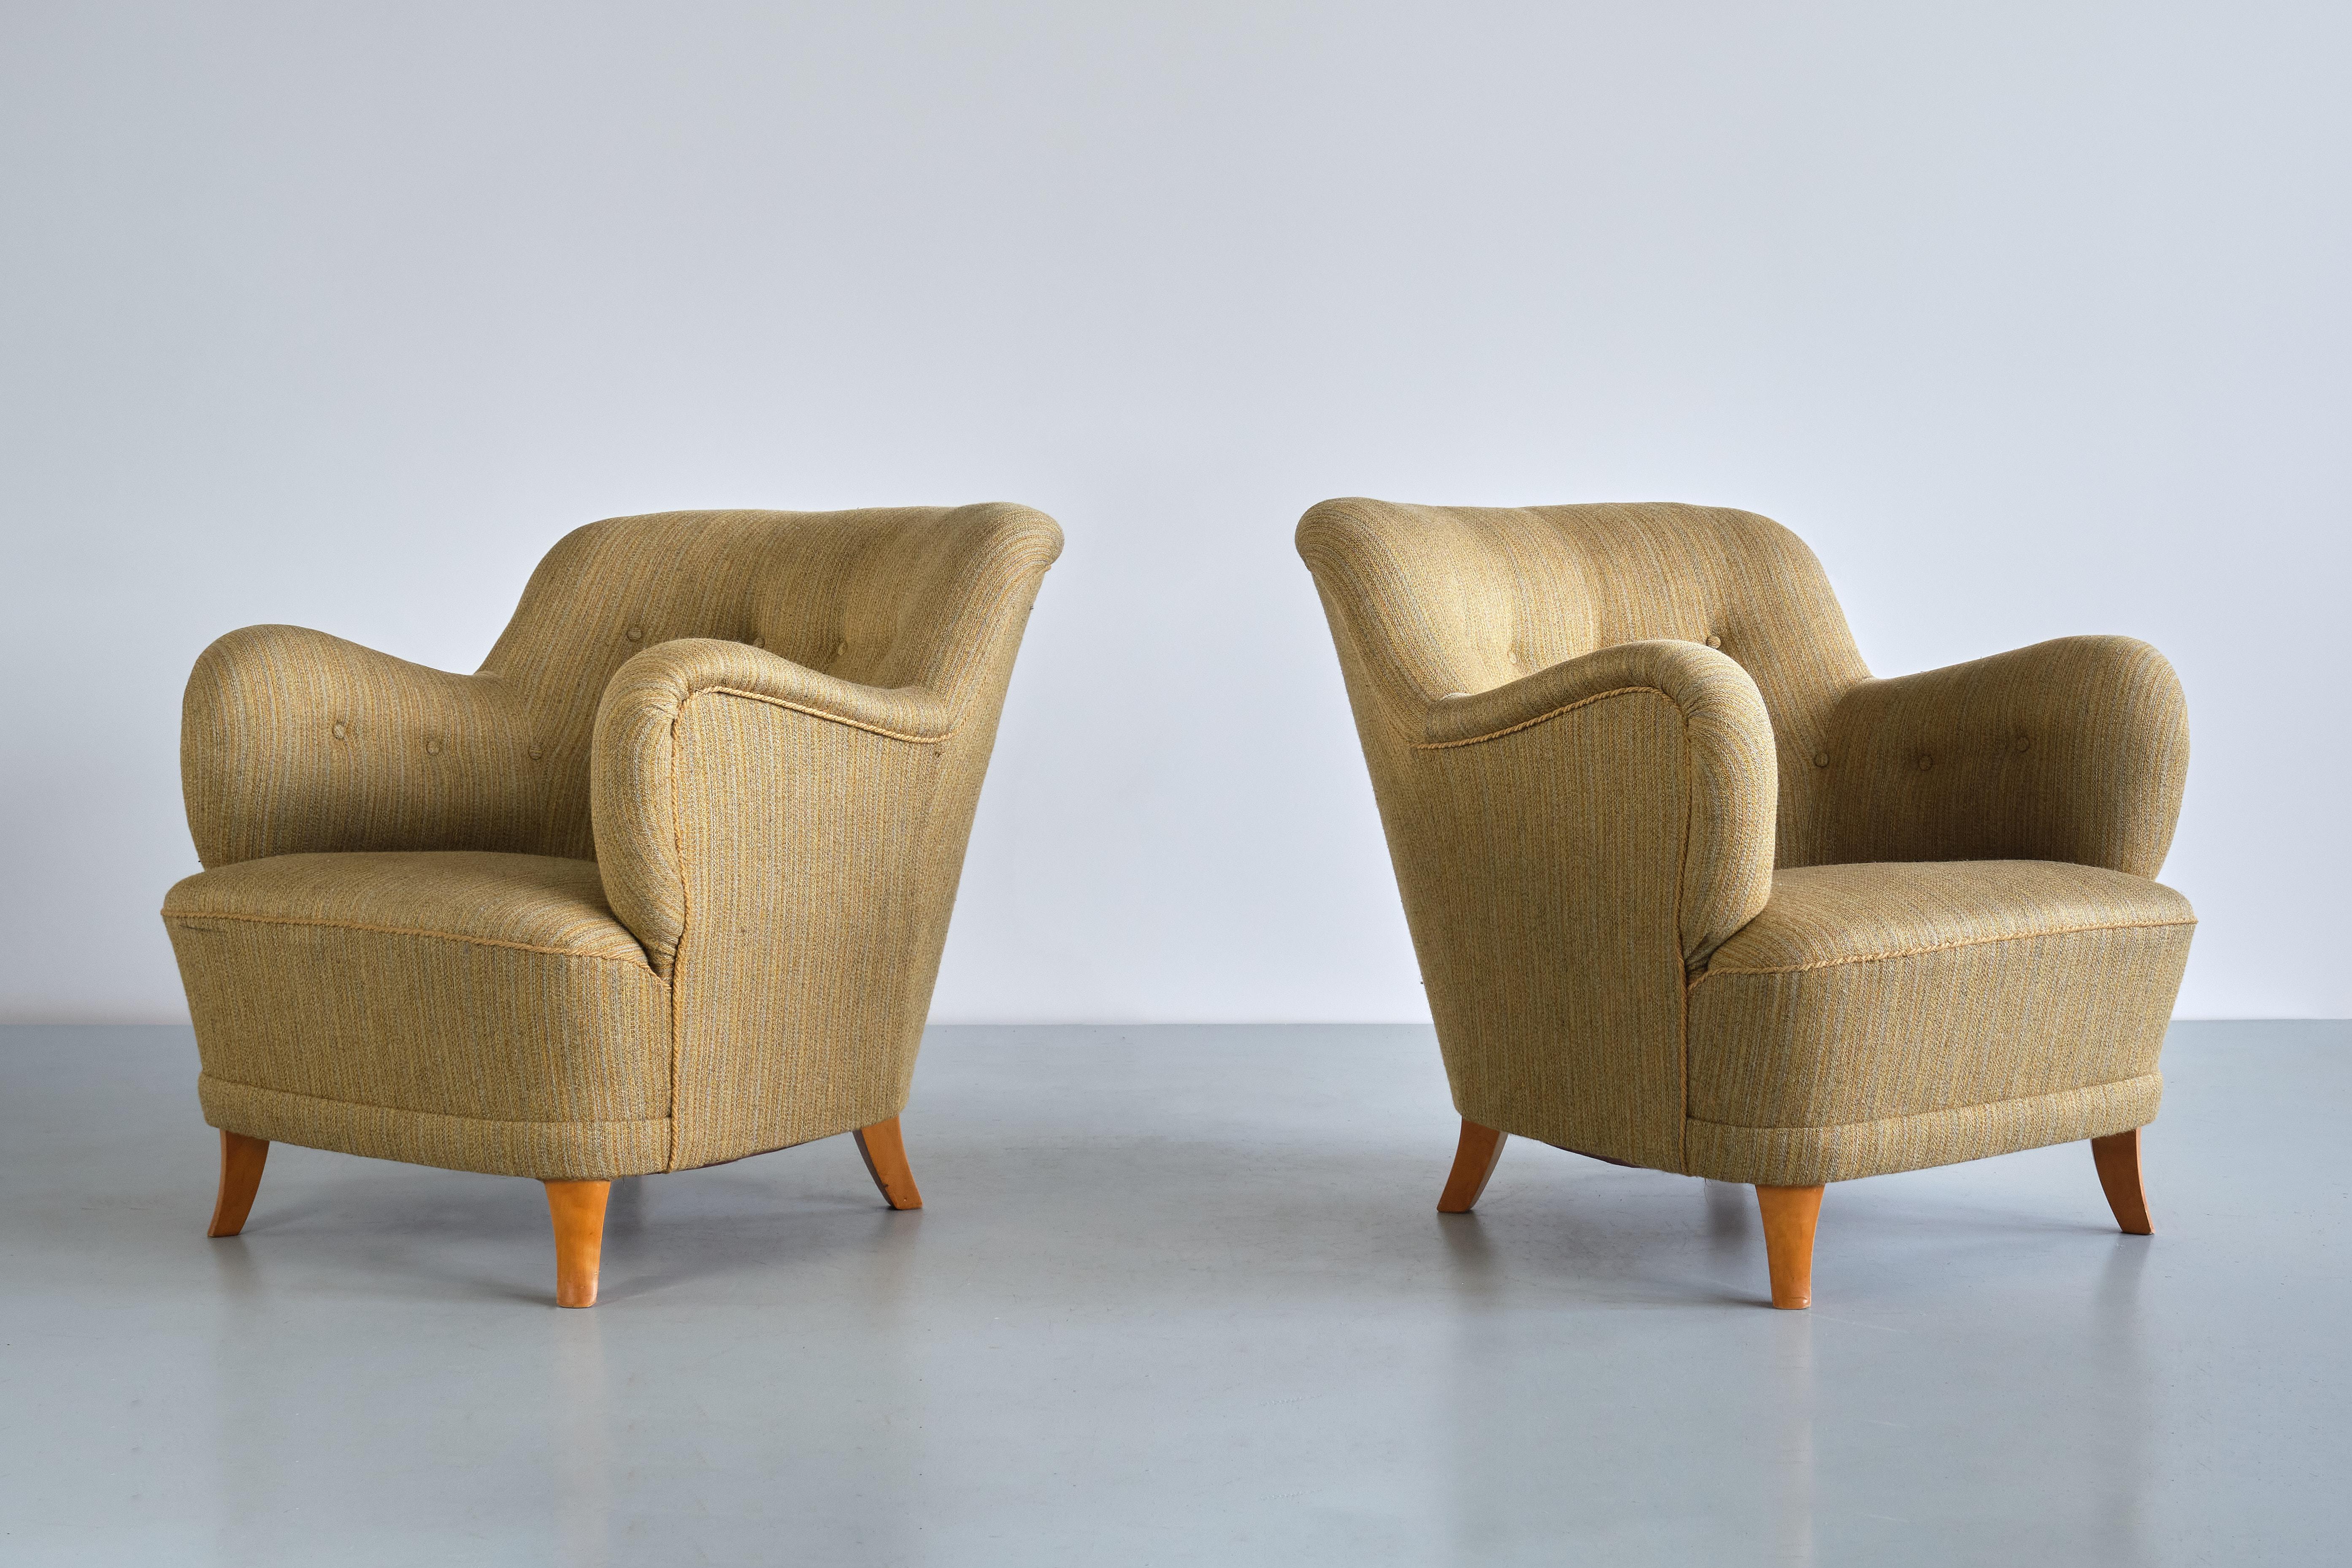 Sculptural Pair of Gustav Axel Berg Armchairs in Beech and Wool, Sweden, 1940s For Sale 9